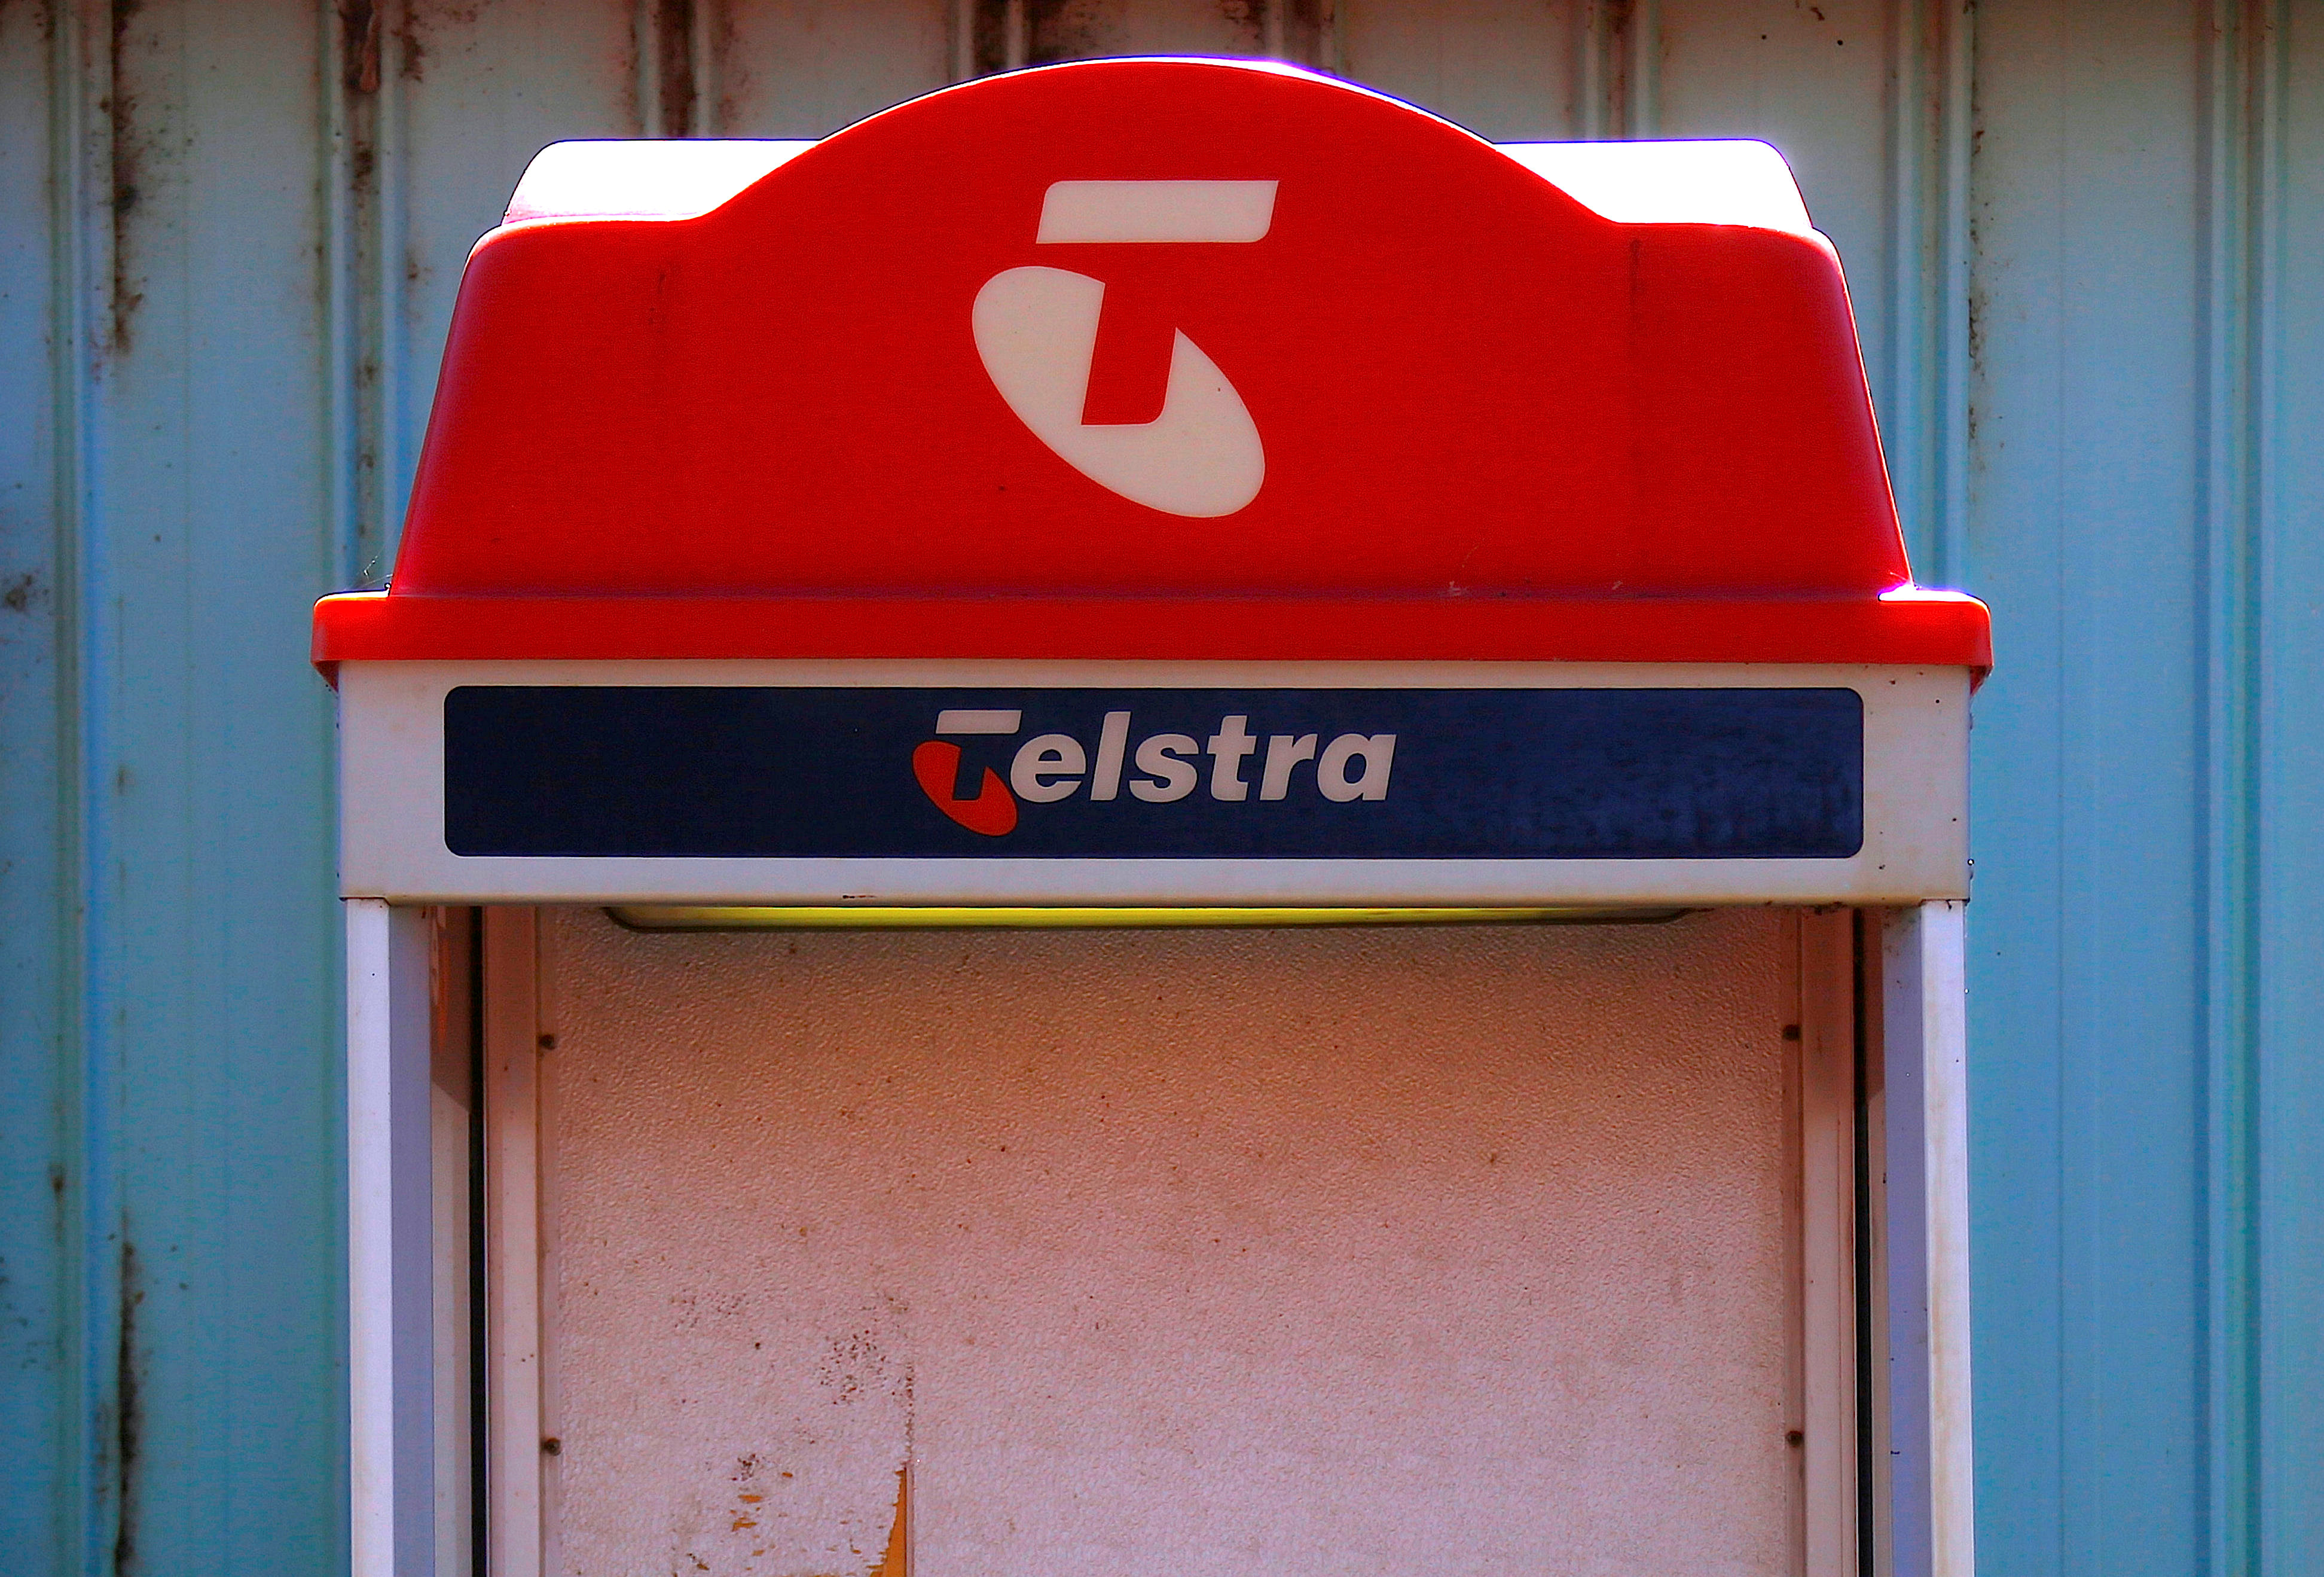 A public phone booth displaying the logo for Telstra Corp Ltd, Australia's biggest telecommunications company, stands outside the Cooladdi Post Office and motel, located in the town of Cooladdi in southwestern Queensland